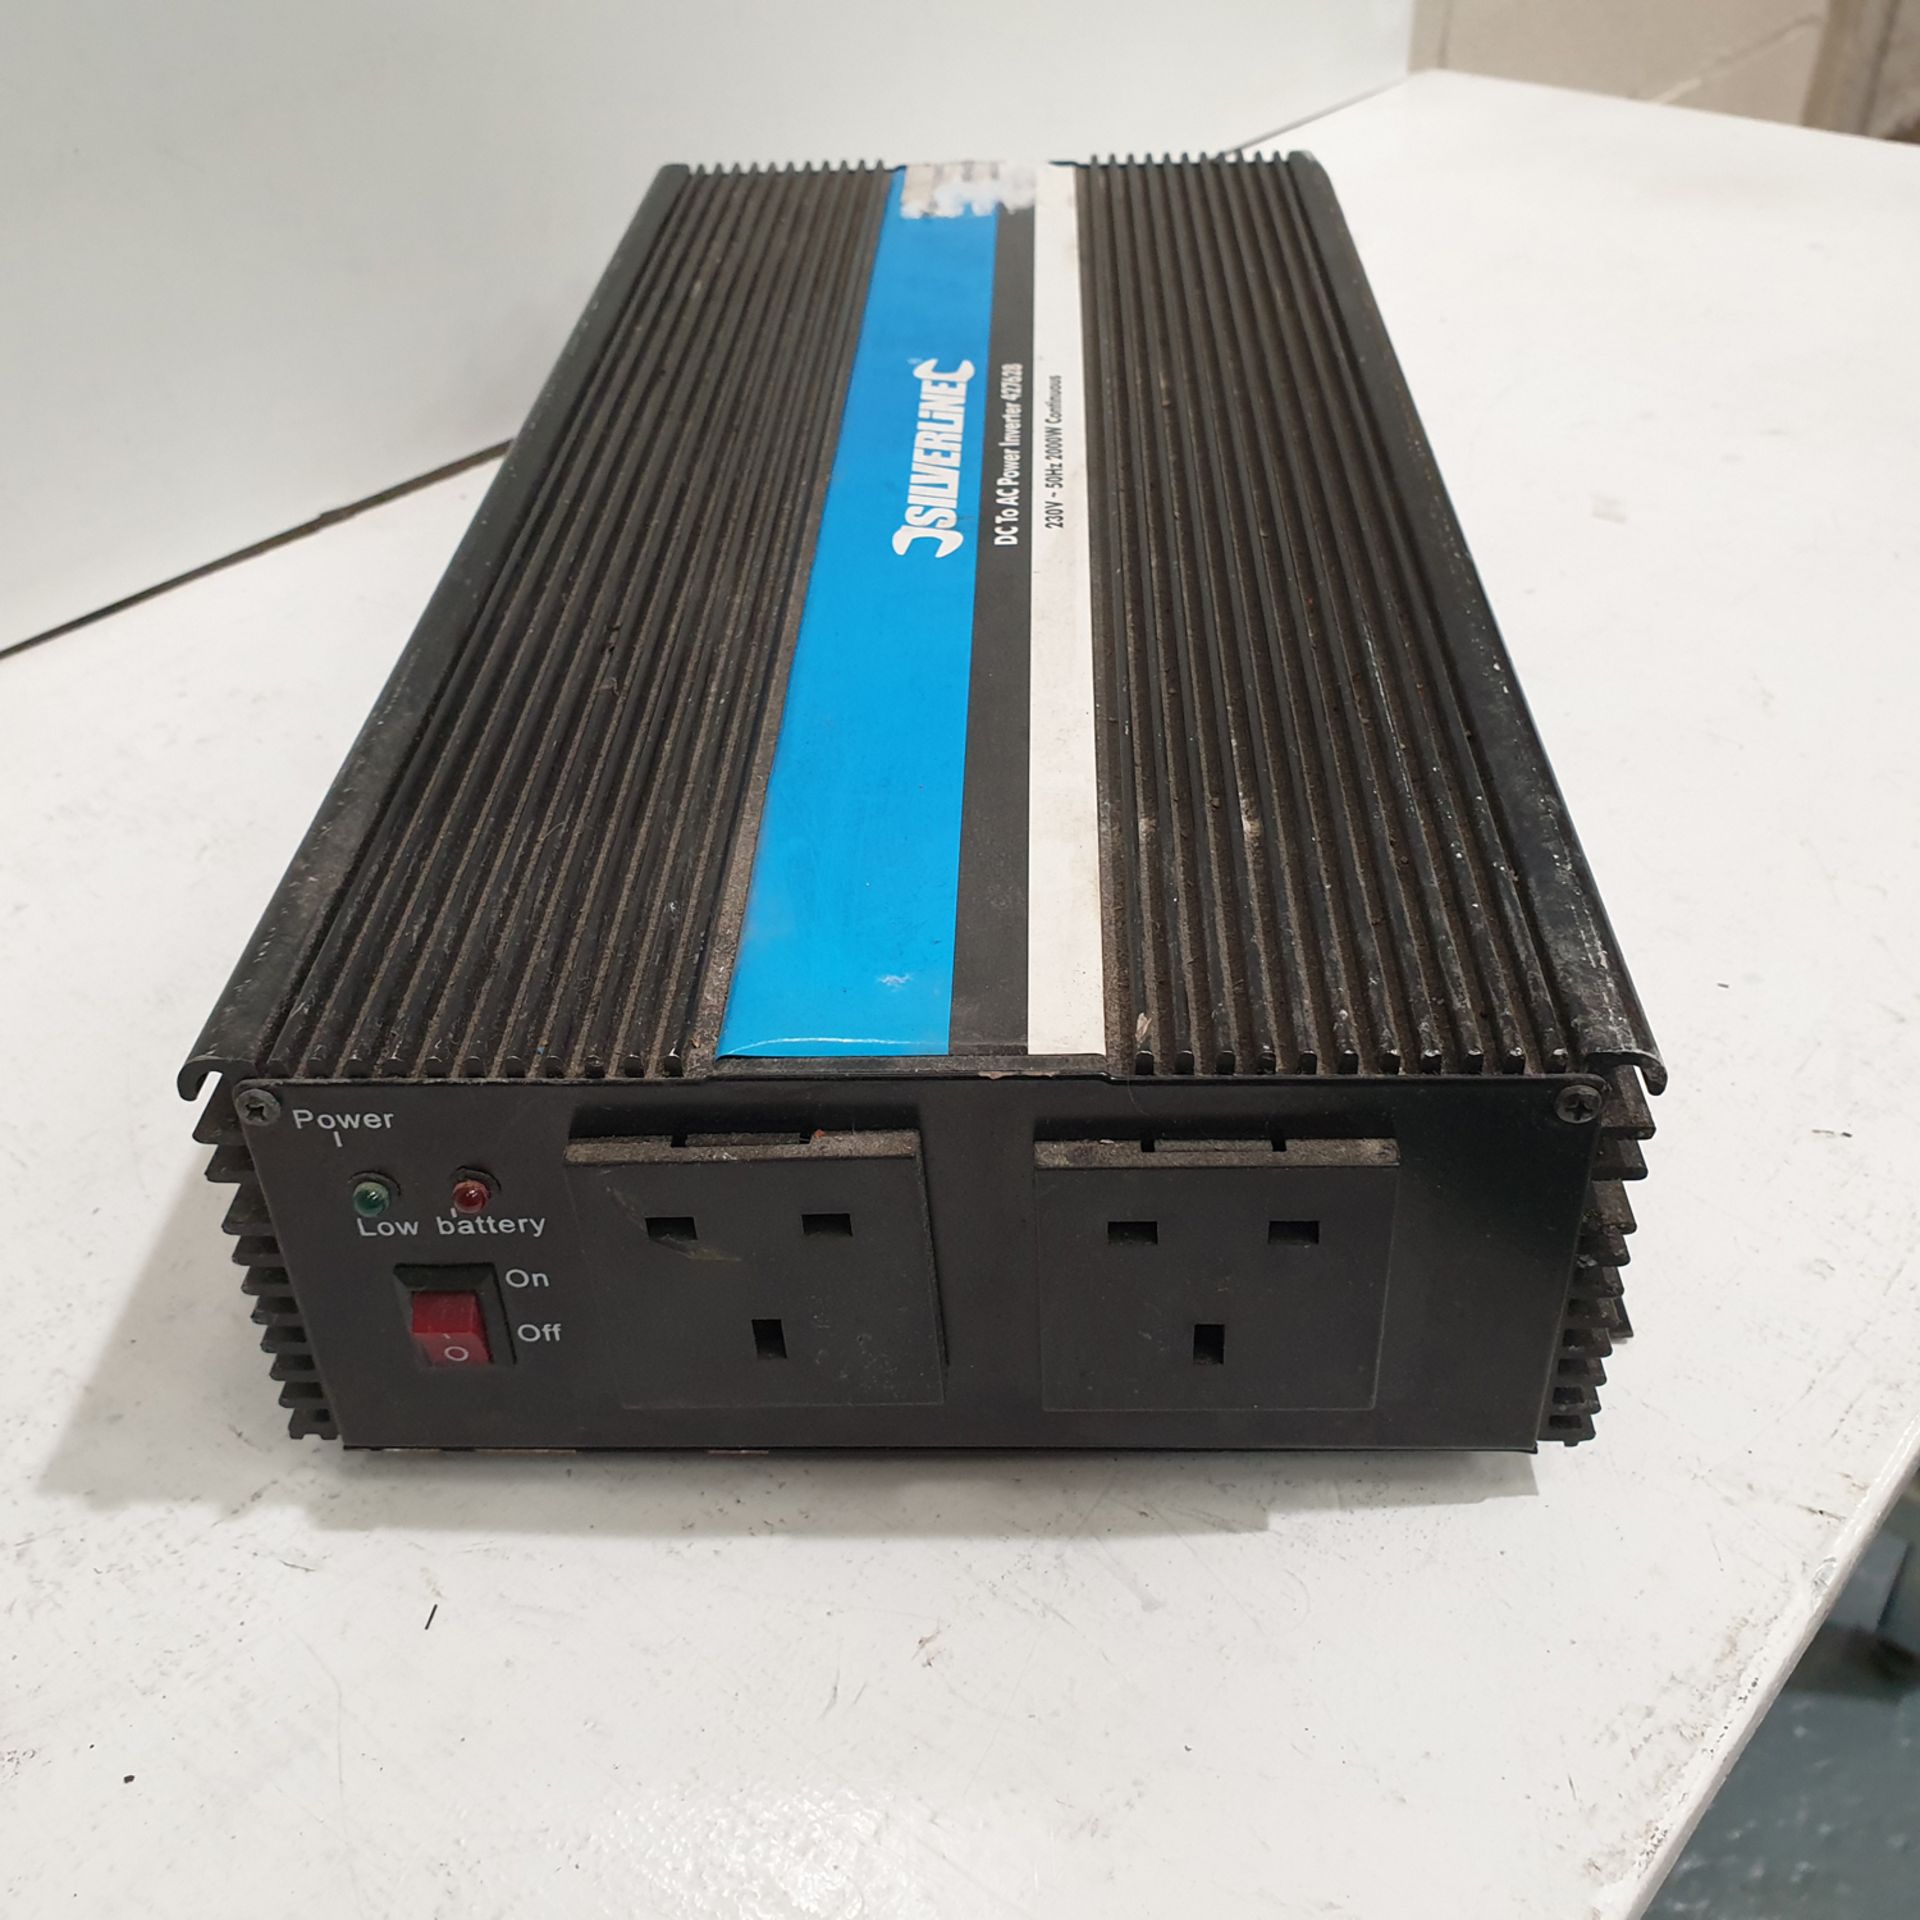 SILVERLINE DC to AC Power Inverter. Model 427628. 230V / 50Hz / 2000W Continuous. - Image 4 of 5